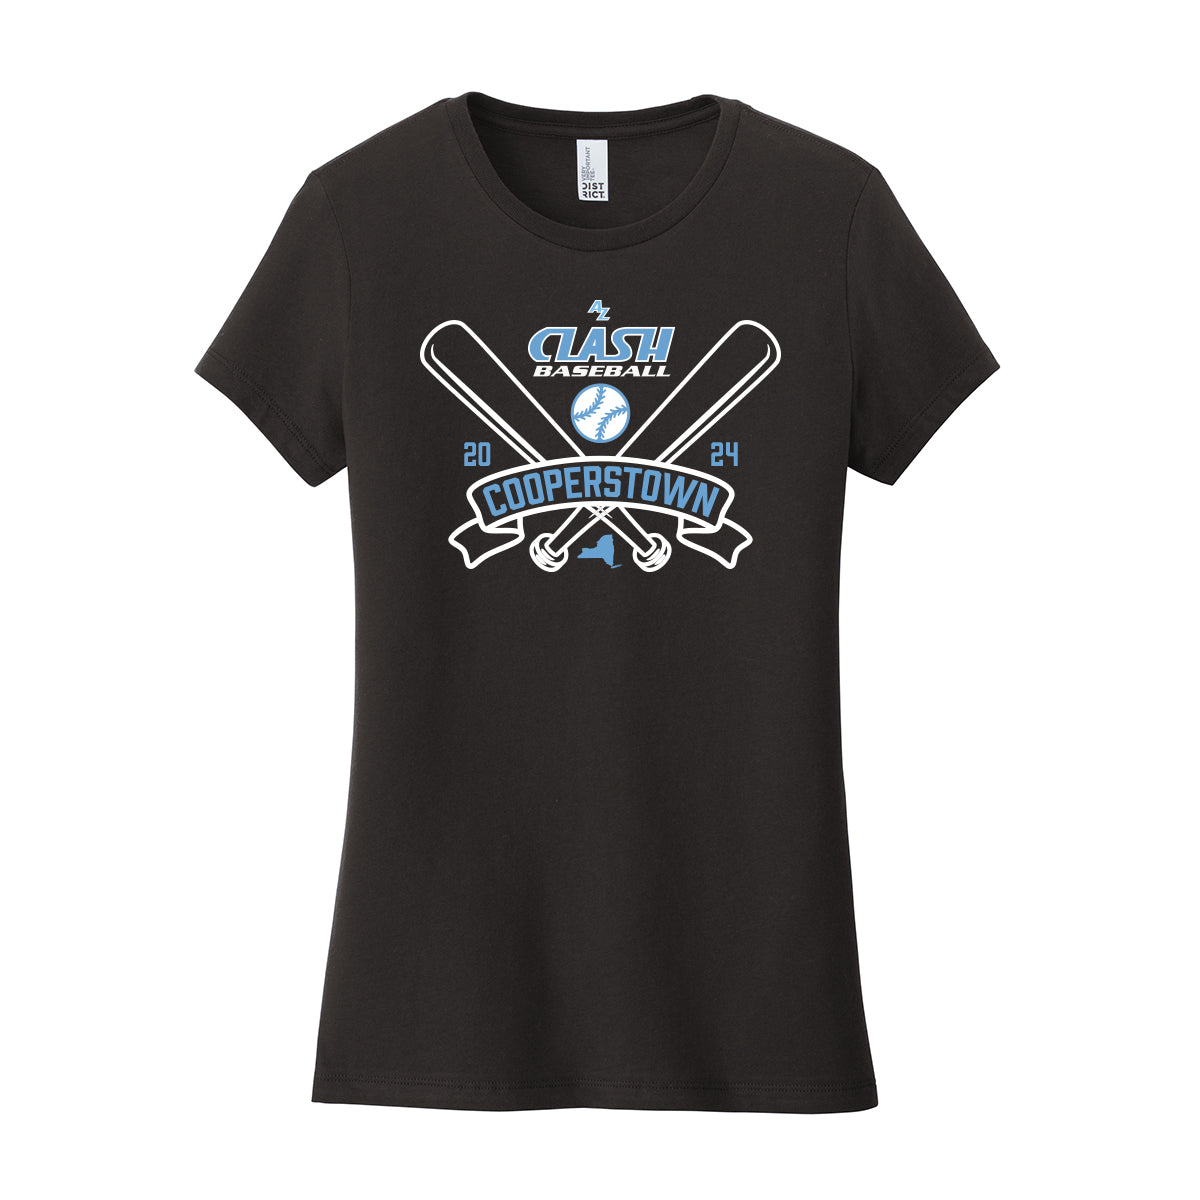 AZ Clash Cooperstown Women's Fitted Tee